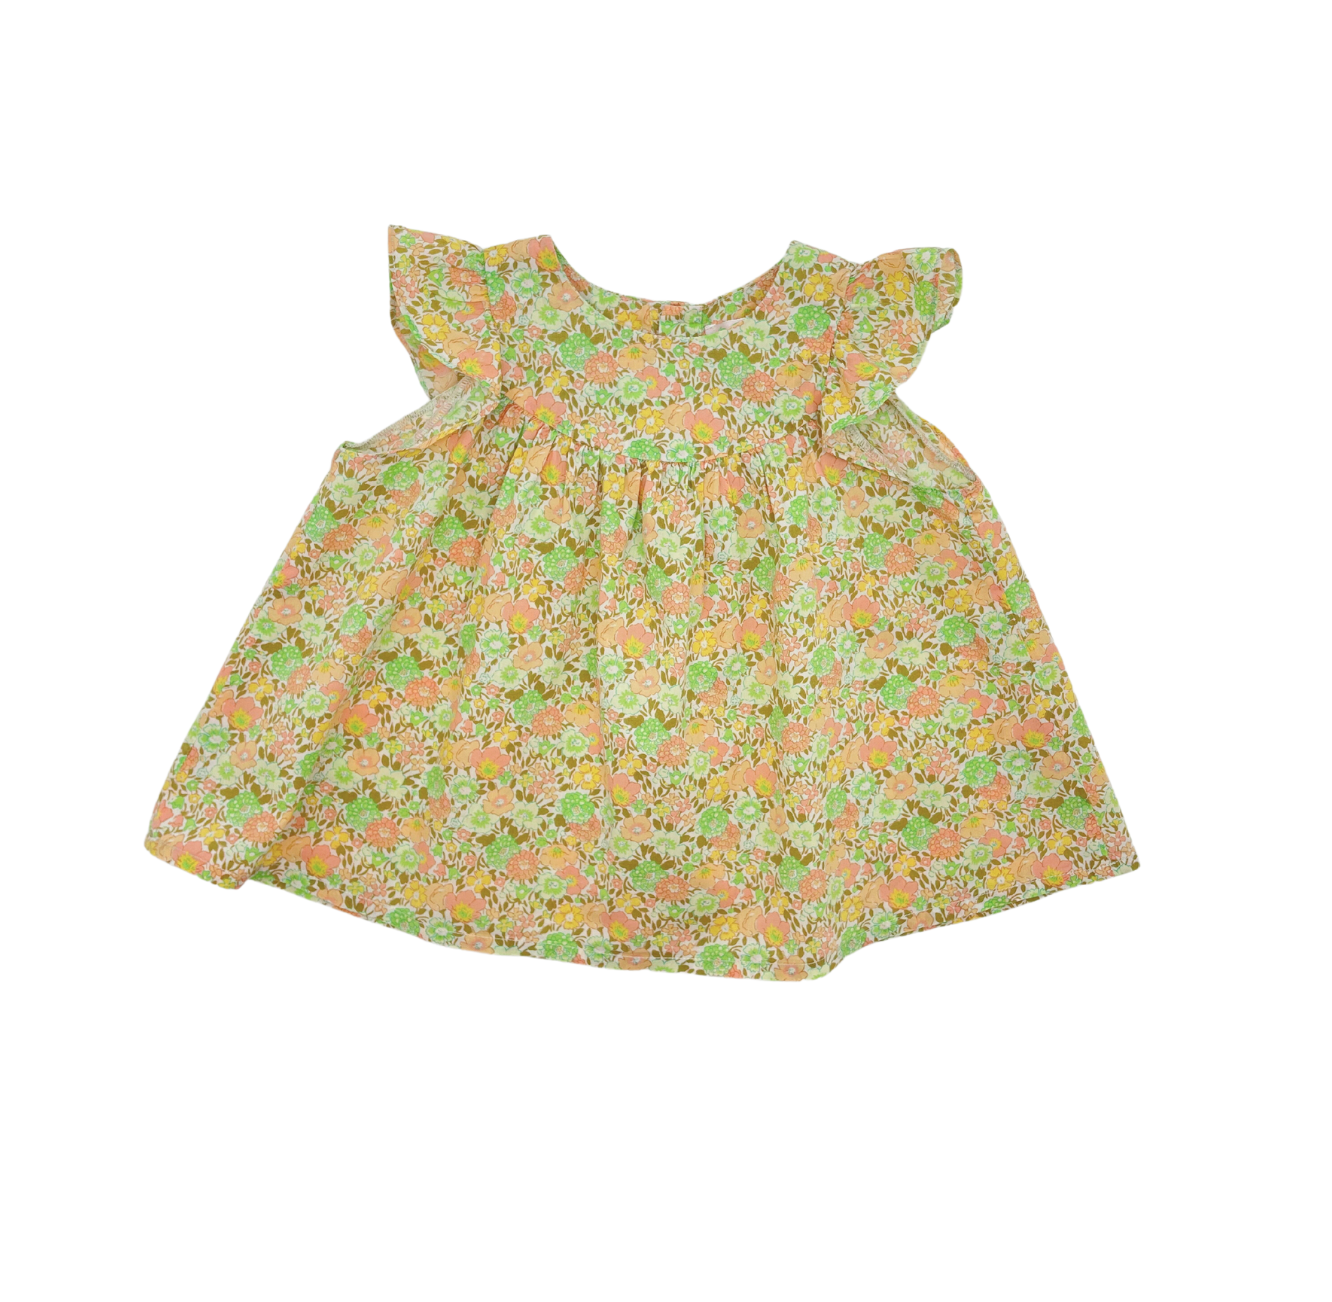 BONPOINT - Liberty floral blouse - 2 years old